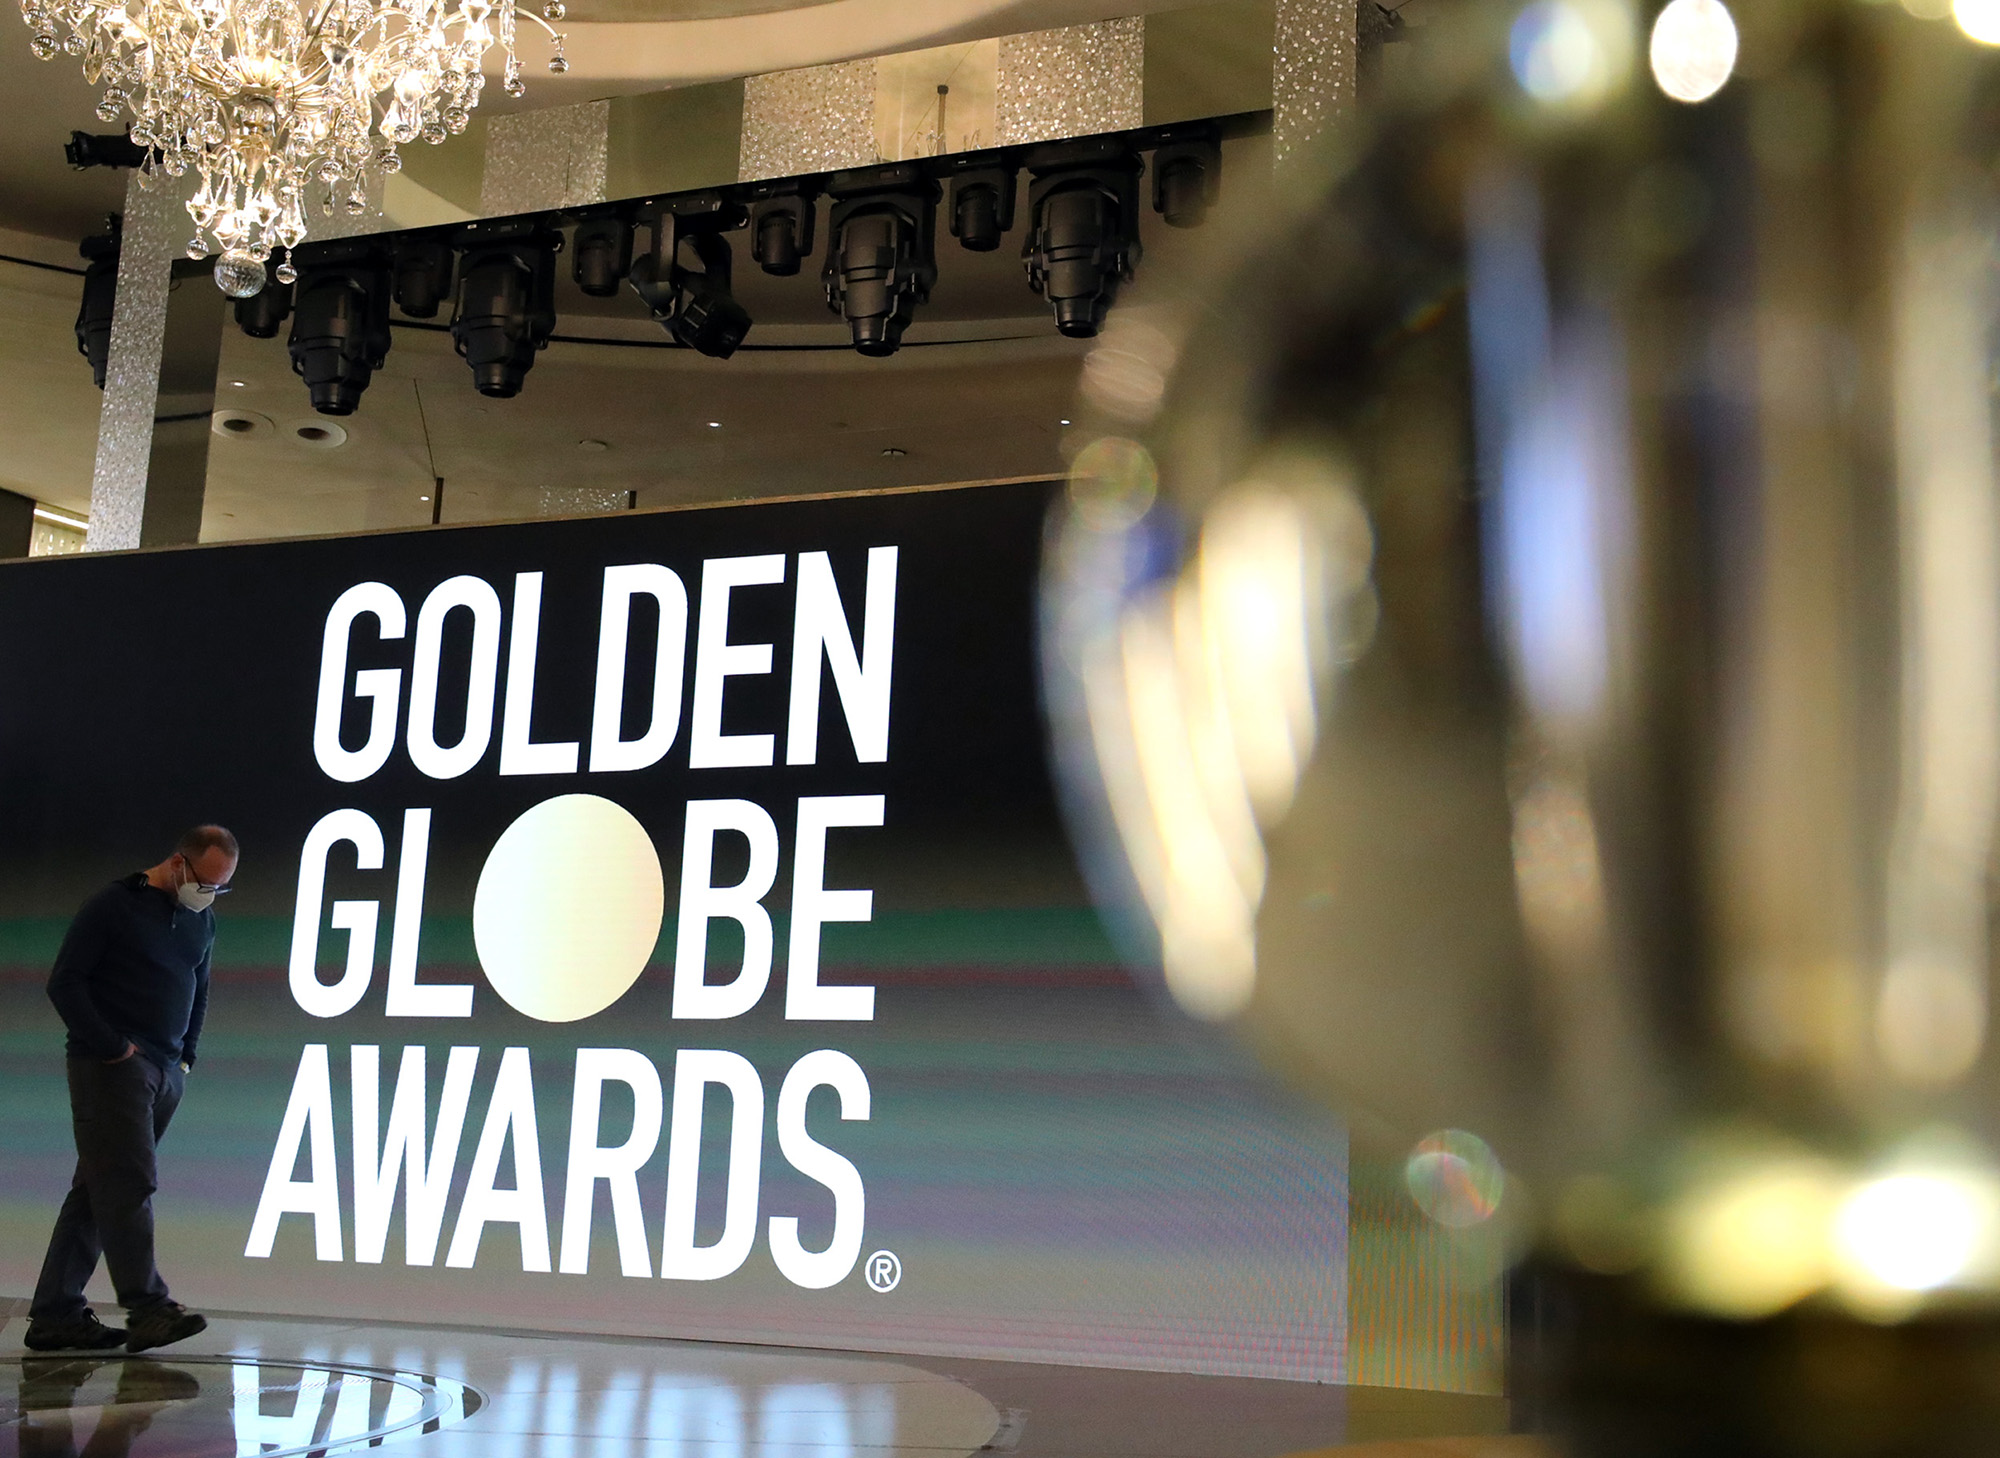 NEW YORK, NEW YORK - FEBRUARY 26: Interior view during the 78th Annual Golden Globes Media Preview at The Rainbow Room on February 26, 2021 in New York, New York. (Photo by Arturo Holmes/Getty Images)